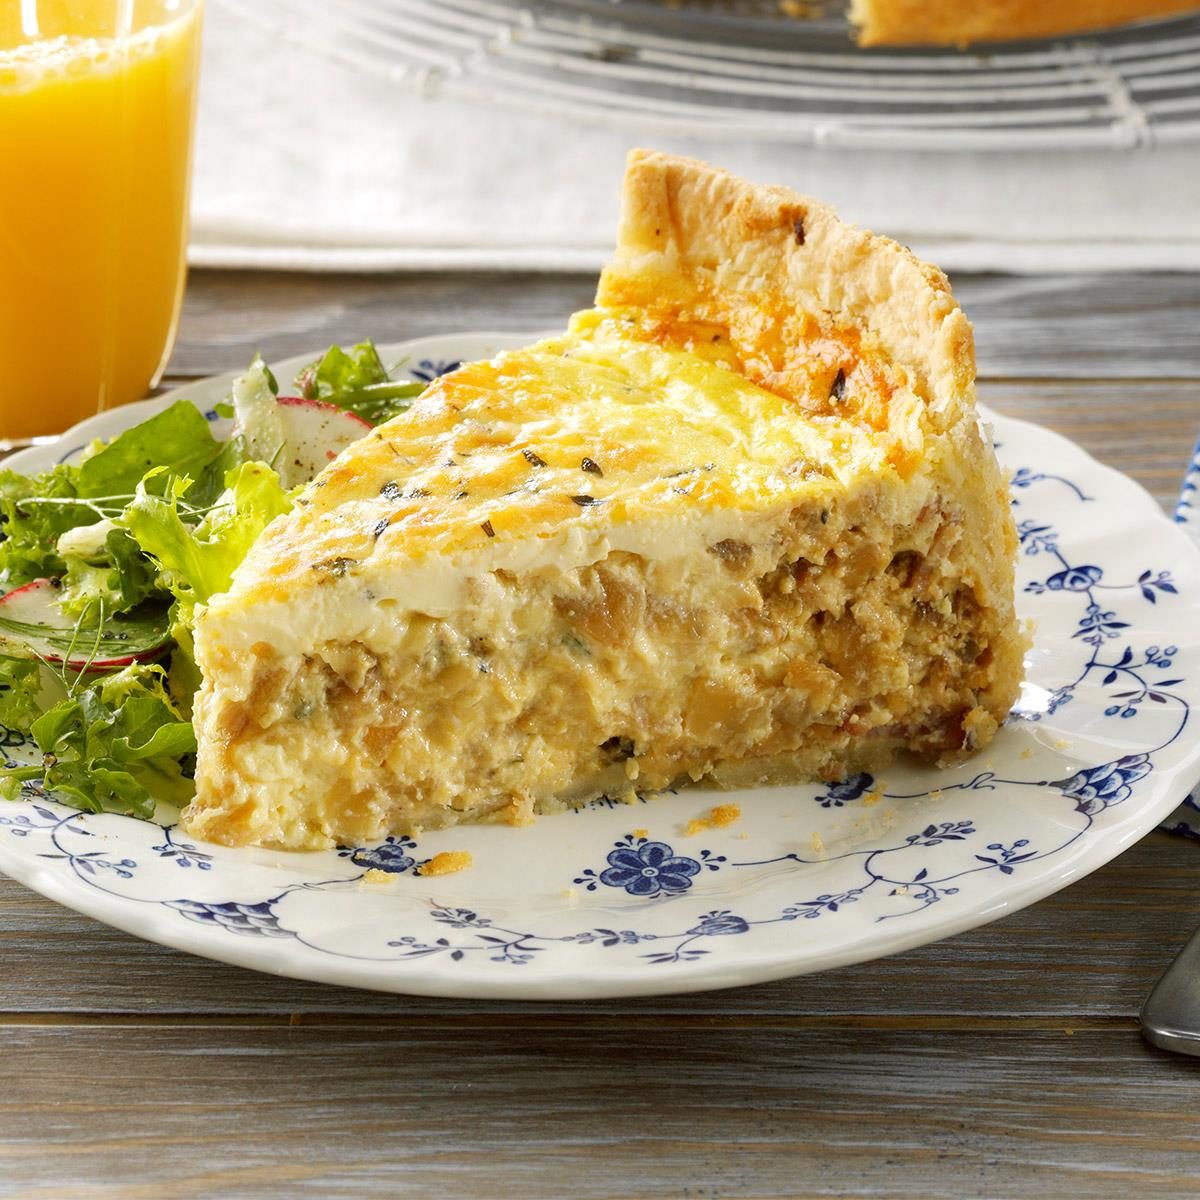 Save on Stop & Shop Quiche Spinach Heat & Serve Order Online Delivery